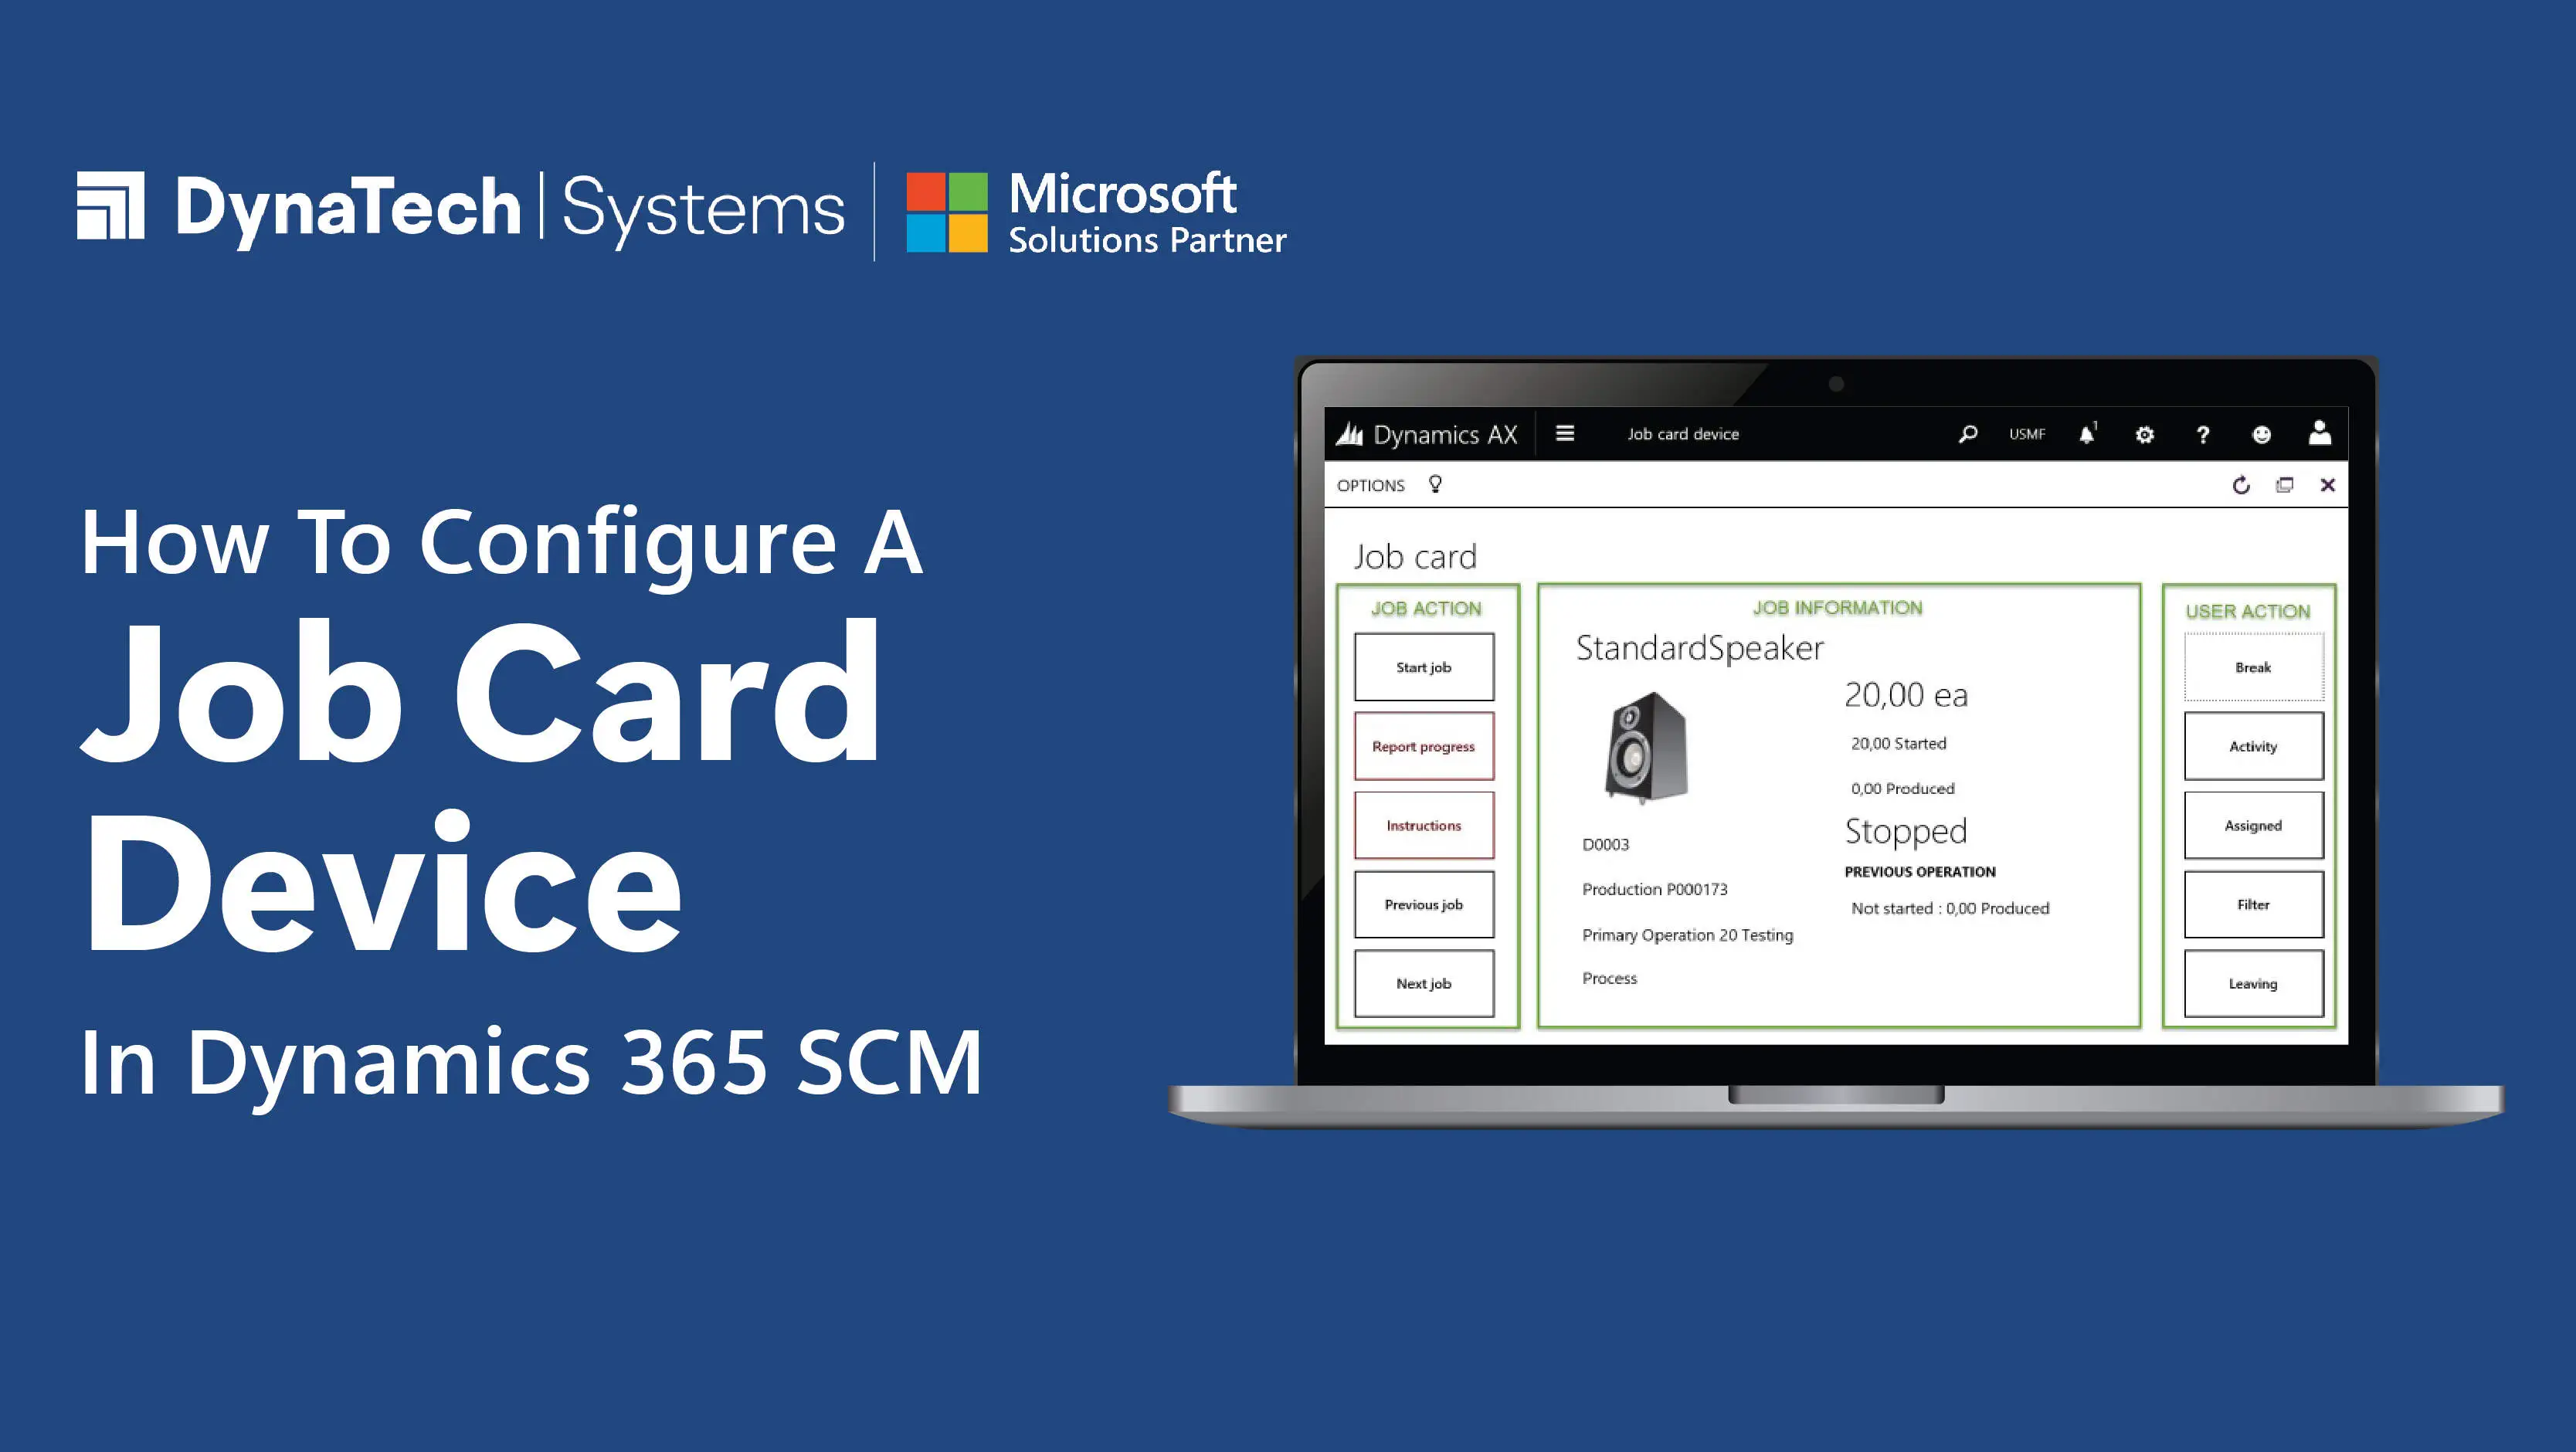 How to Configure a Job Card Device in Dynamics 365 SCM